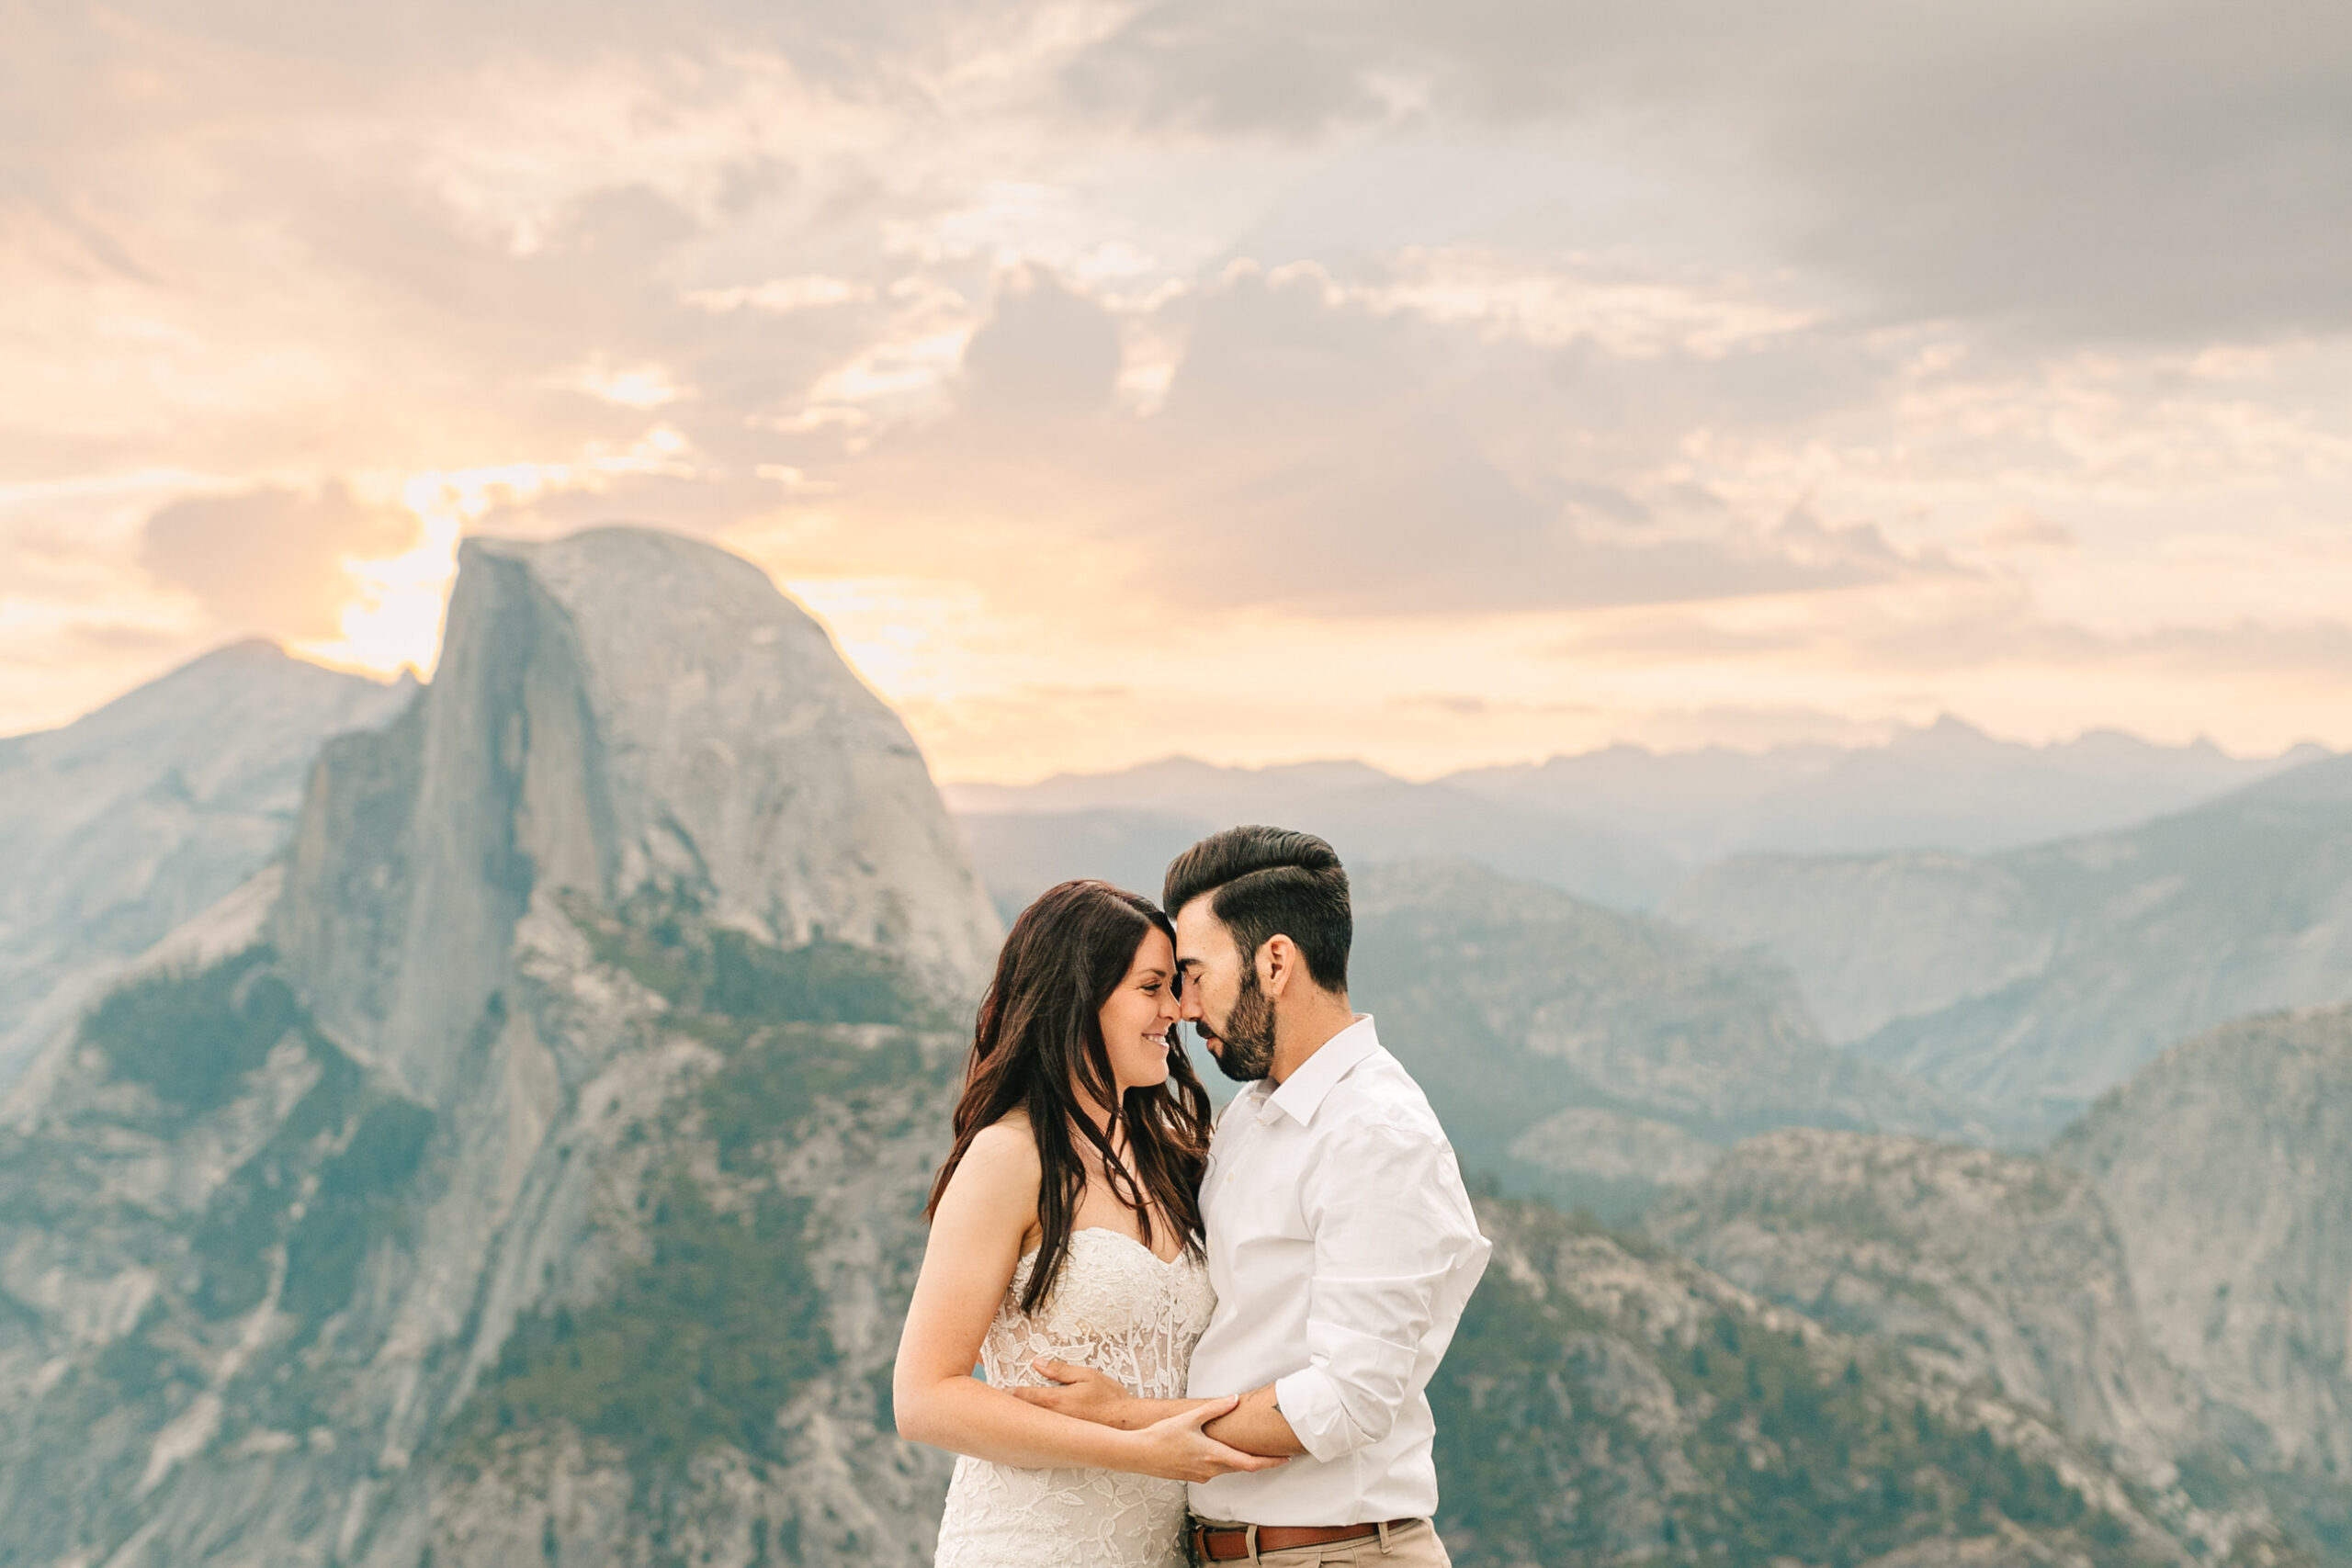 Bride and Groom in a close embrace during sunrise at Glacier Point on their wedding day